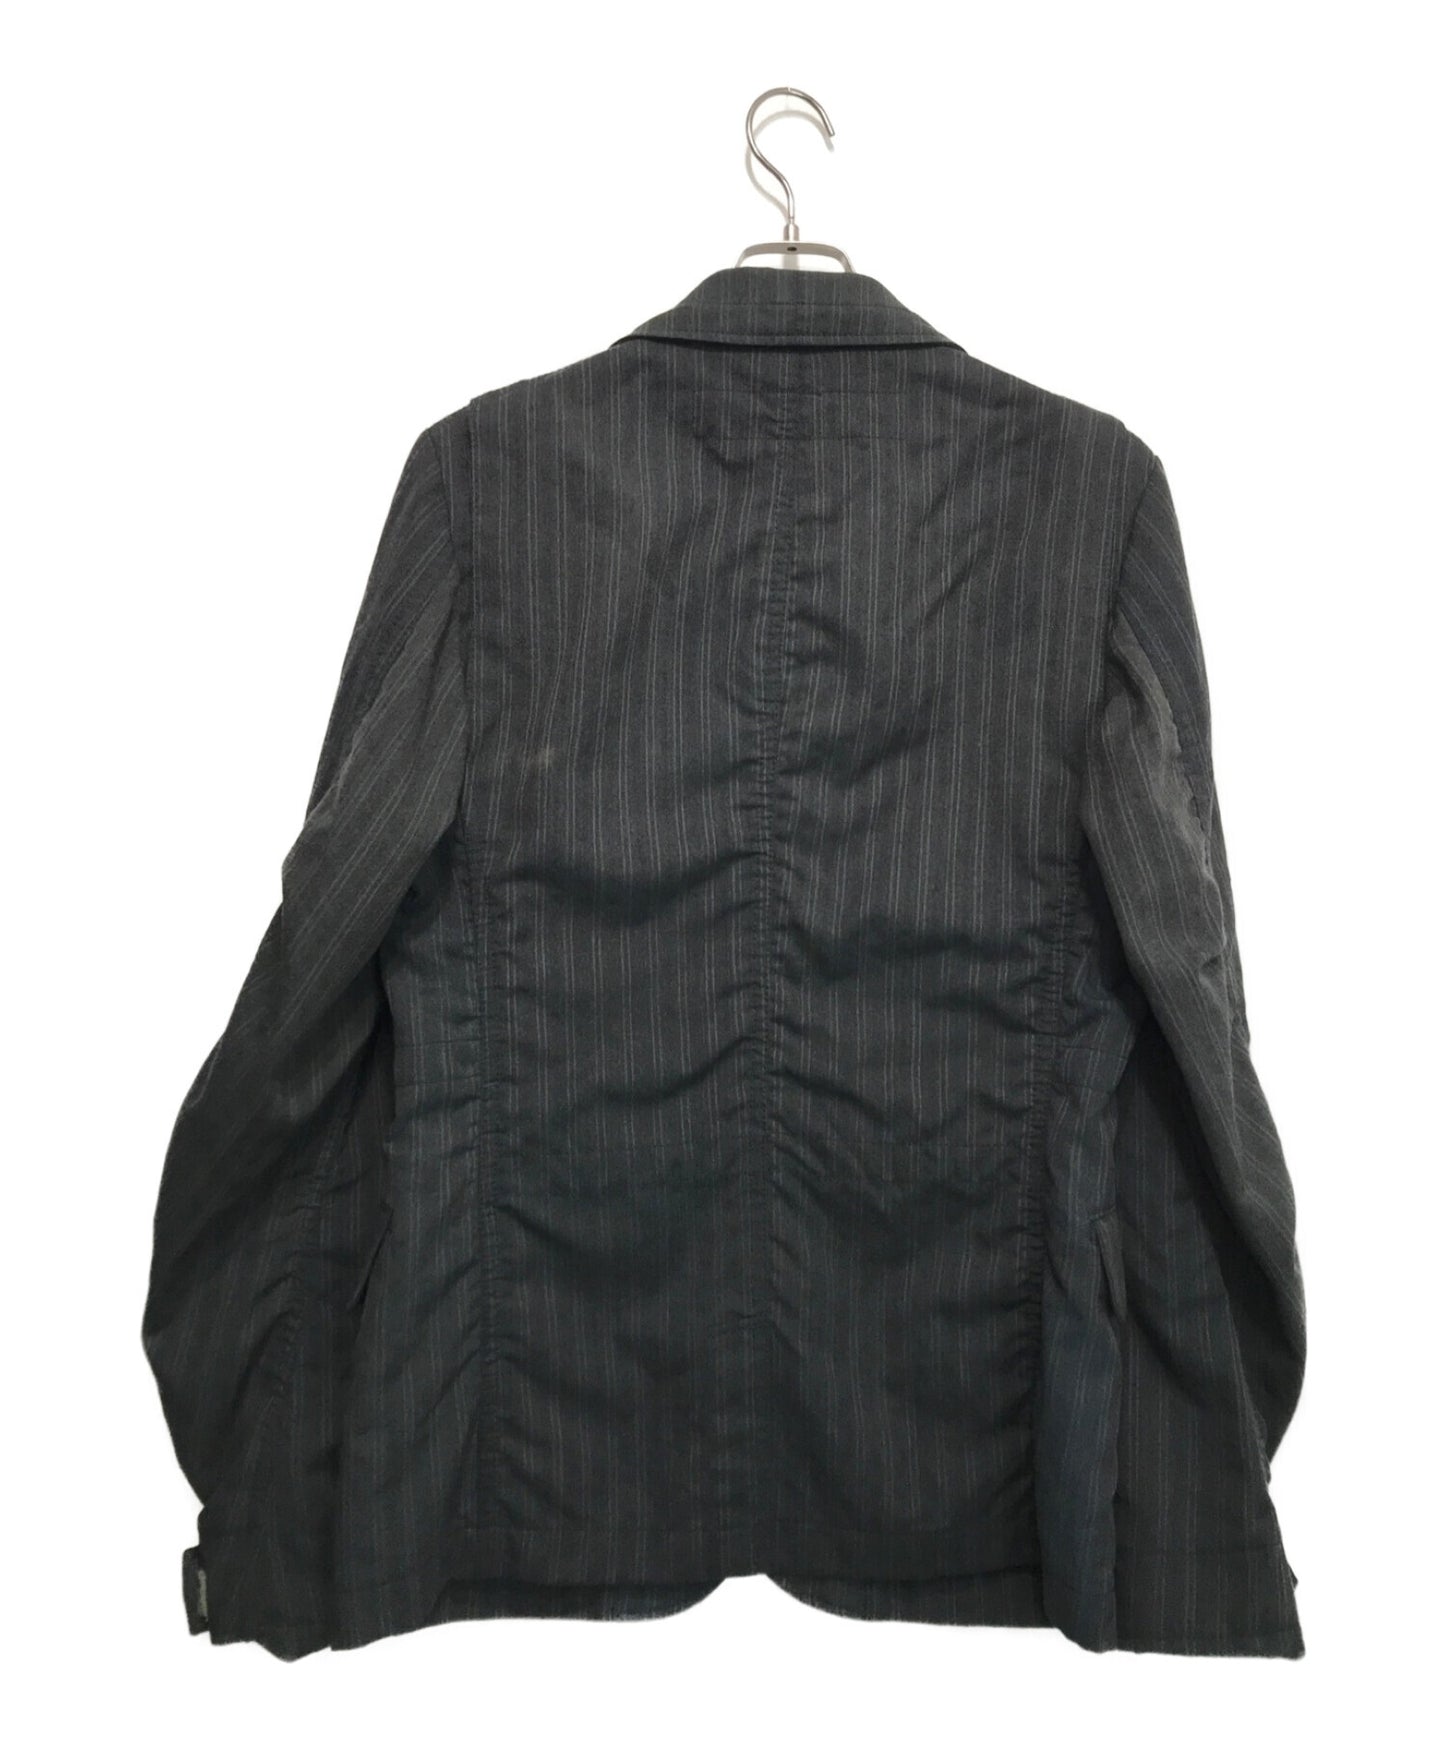 [Pre-owned] COMME des GARCONS JUNYA WATANABE MAN MA1 Reconstructed Tailored Jacket WR-J018